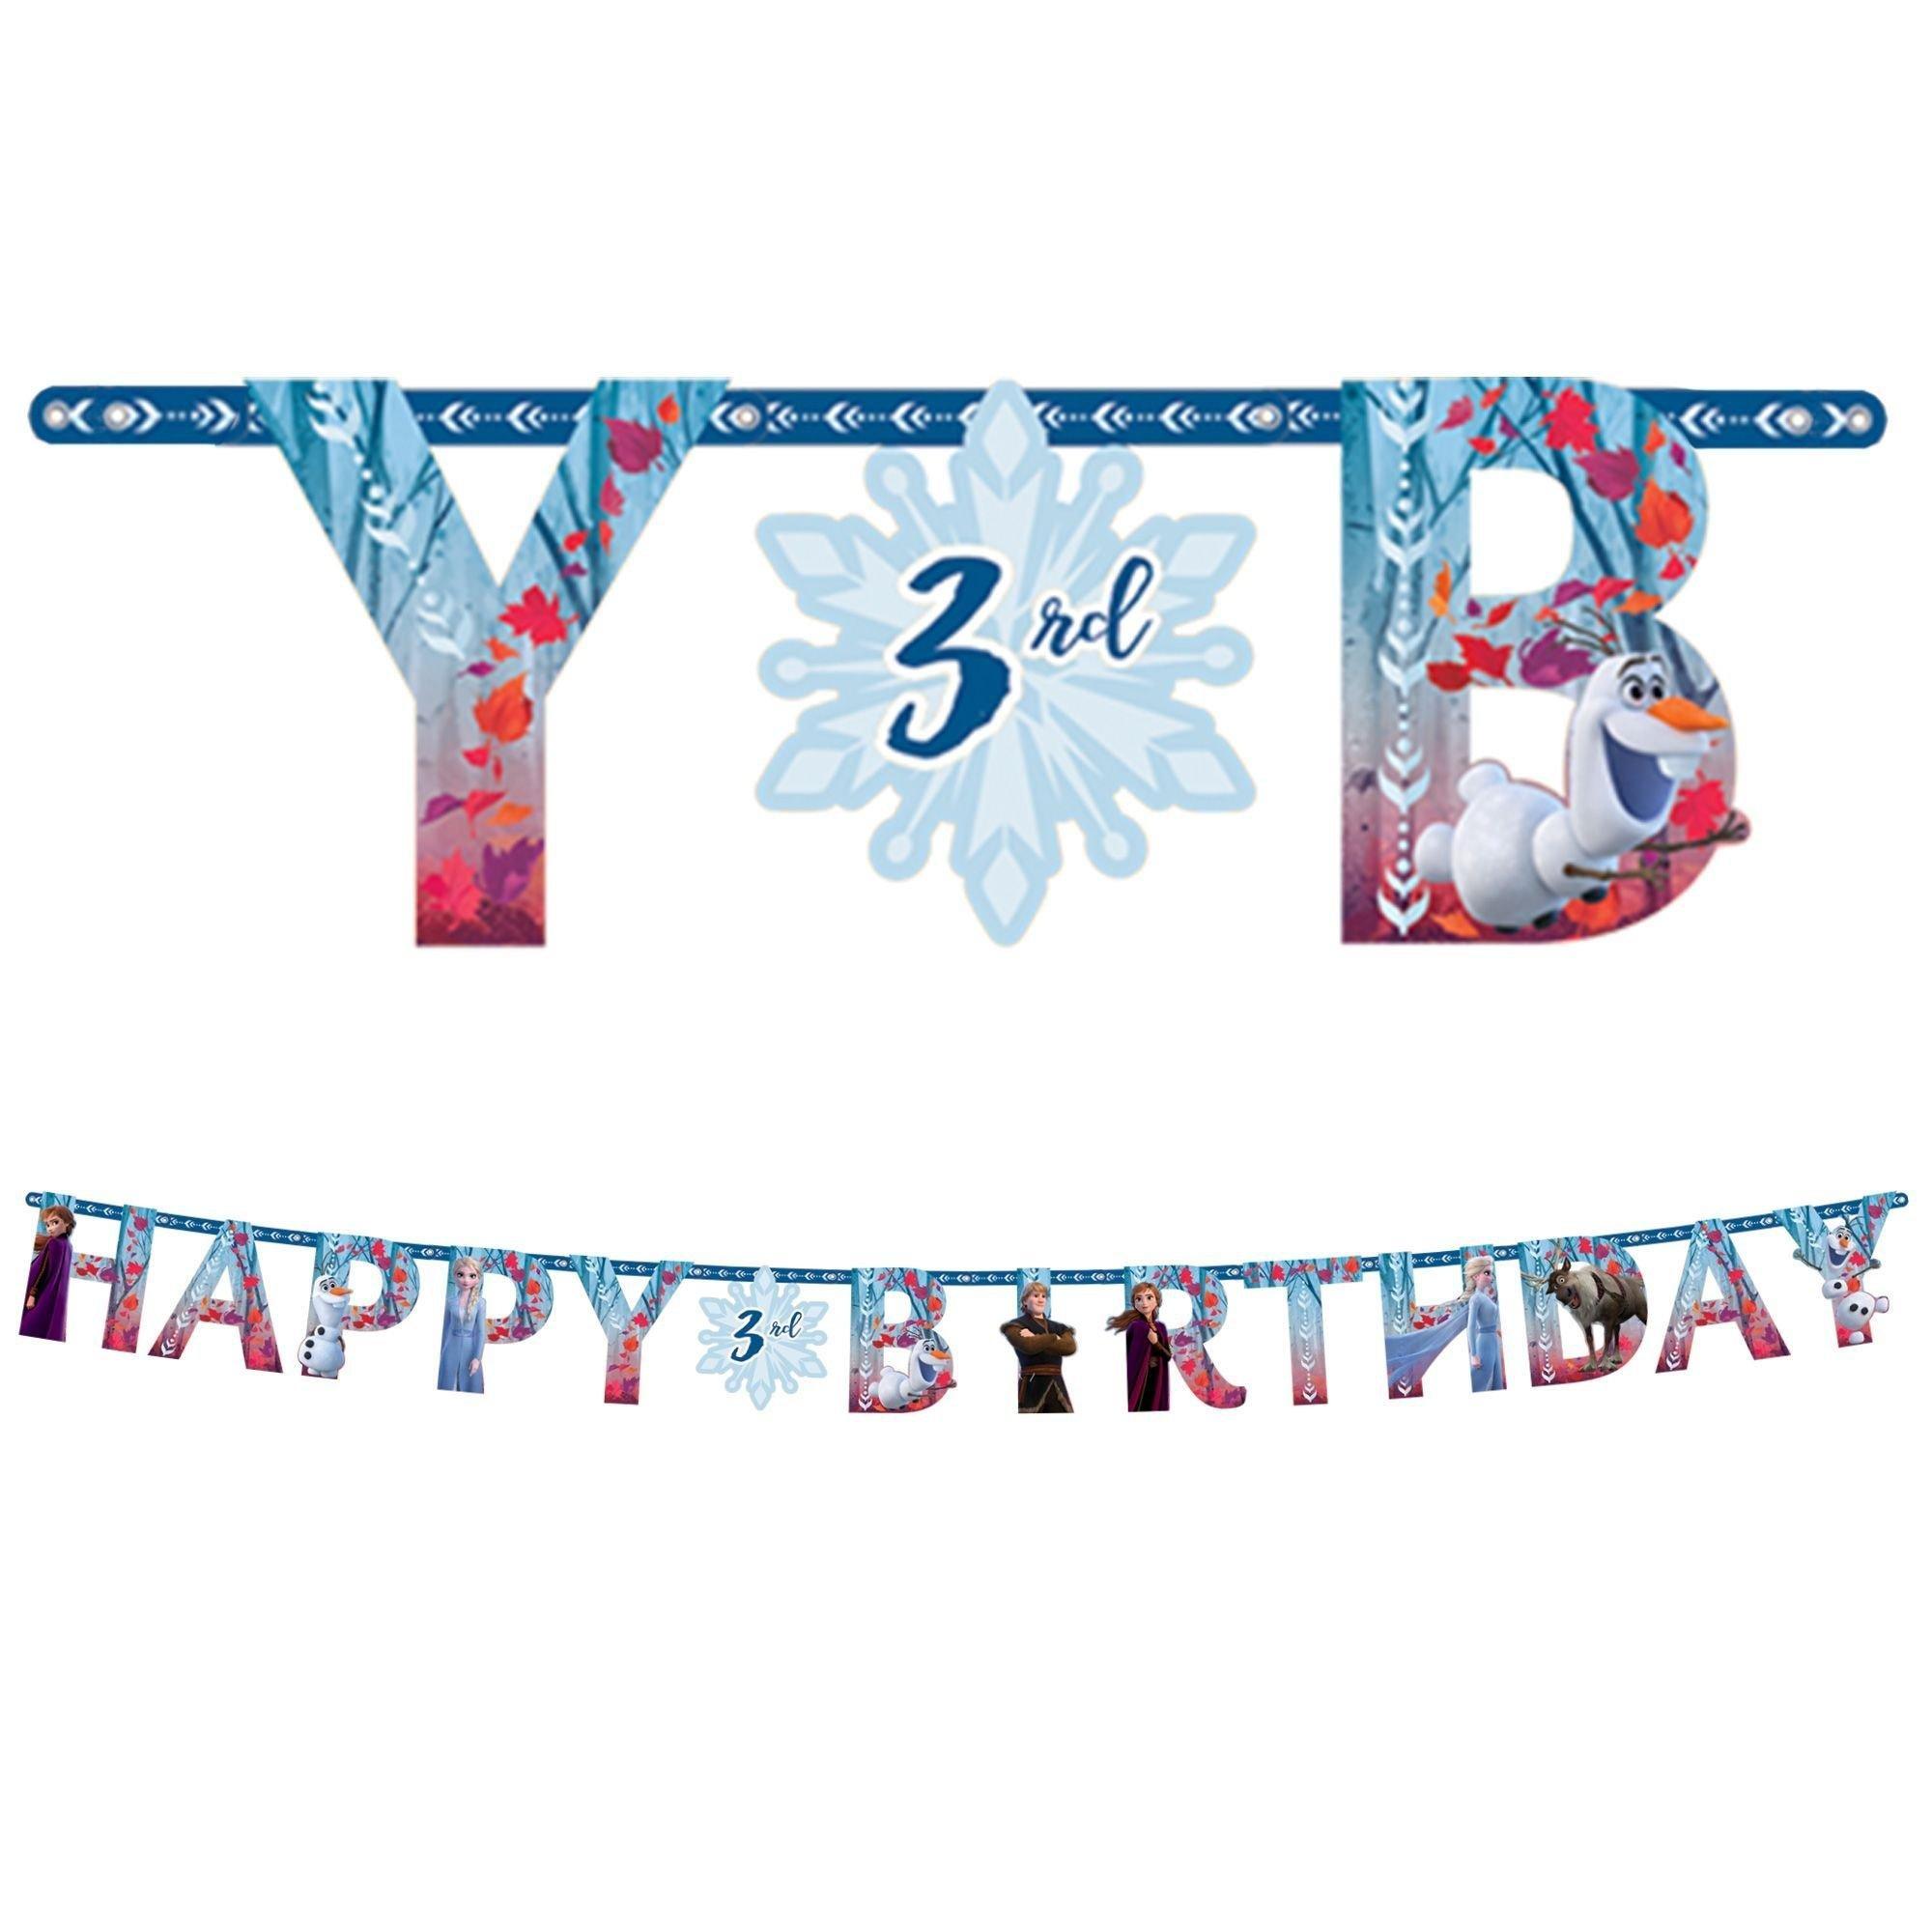 Frozen 2 Party Decorating Supplies Pack - Kit Includes Banner, Swirl Decorations & Centerpiece